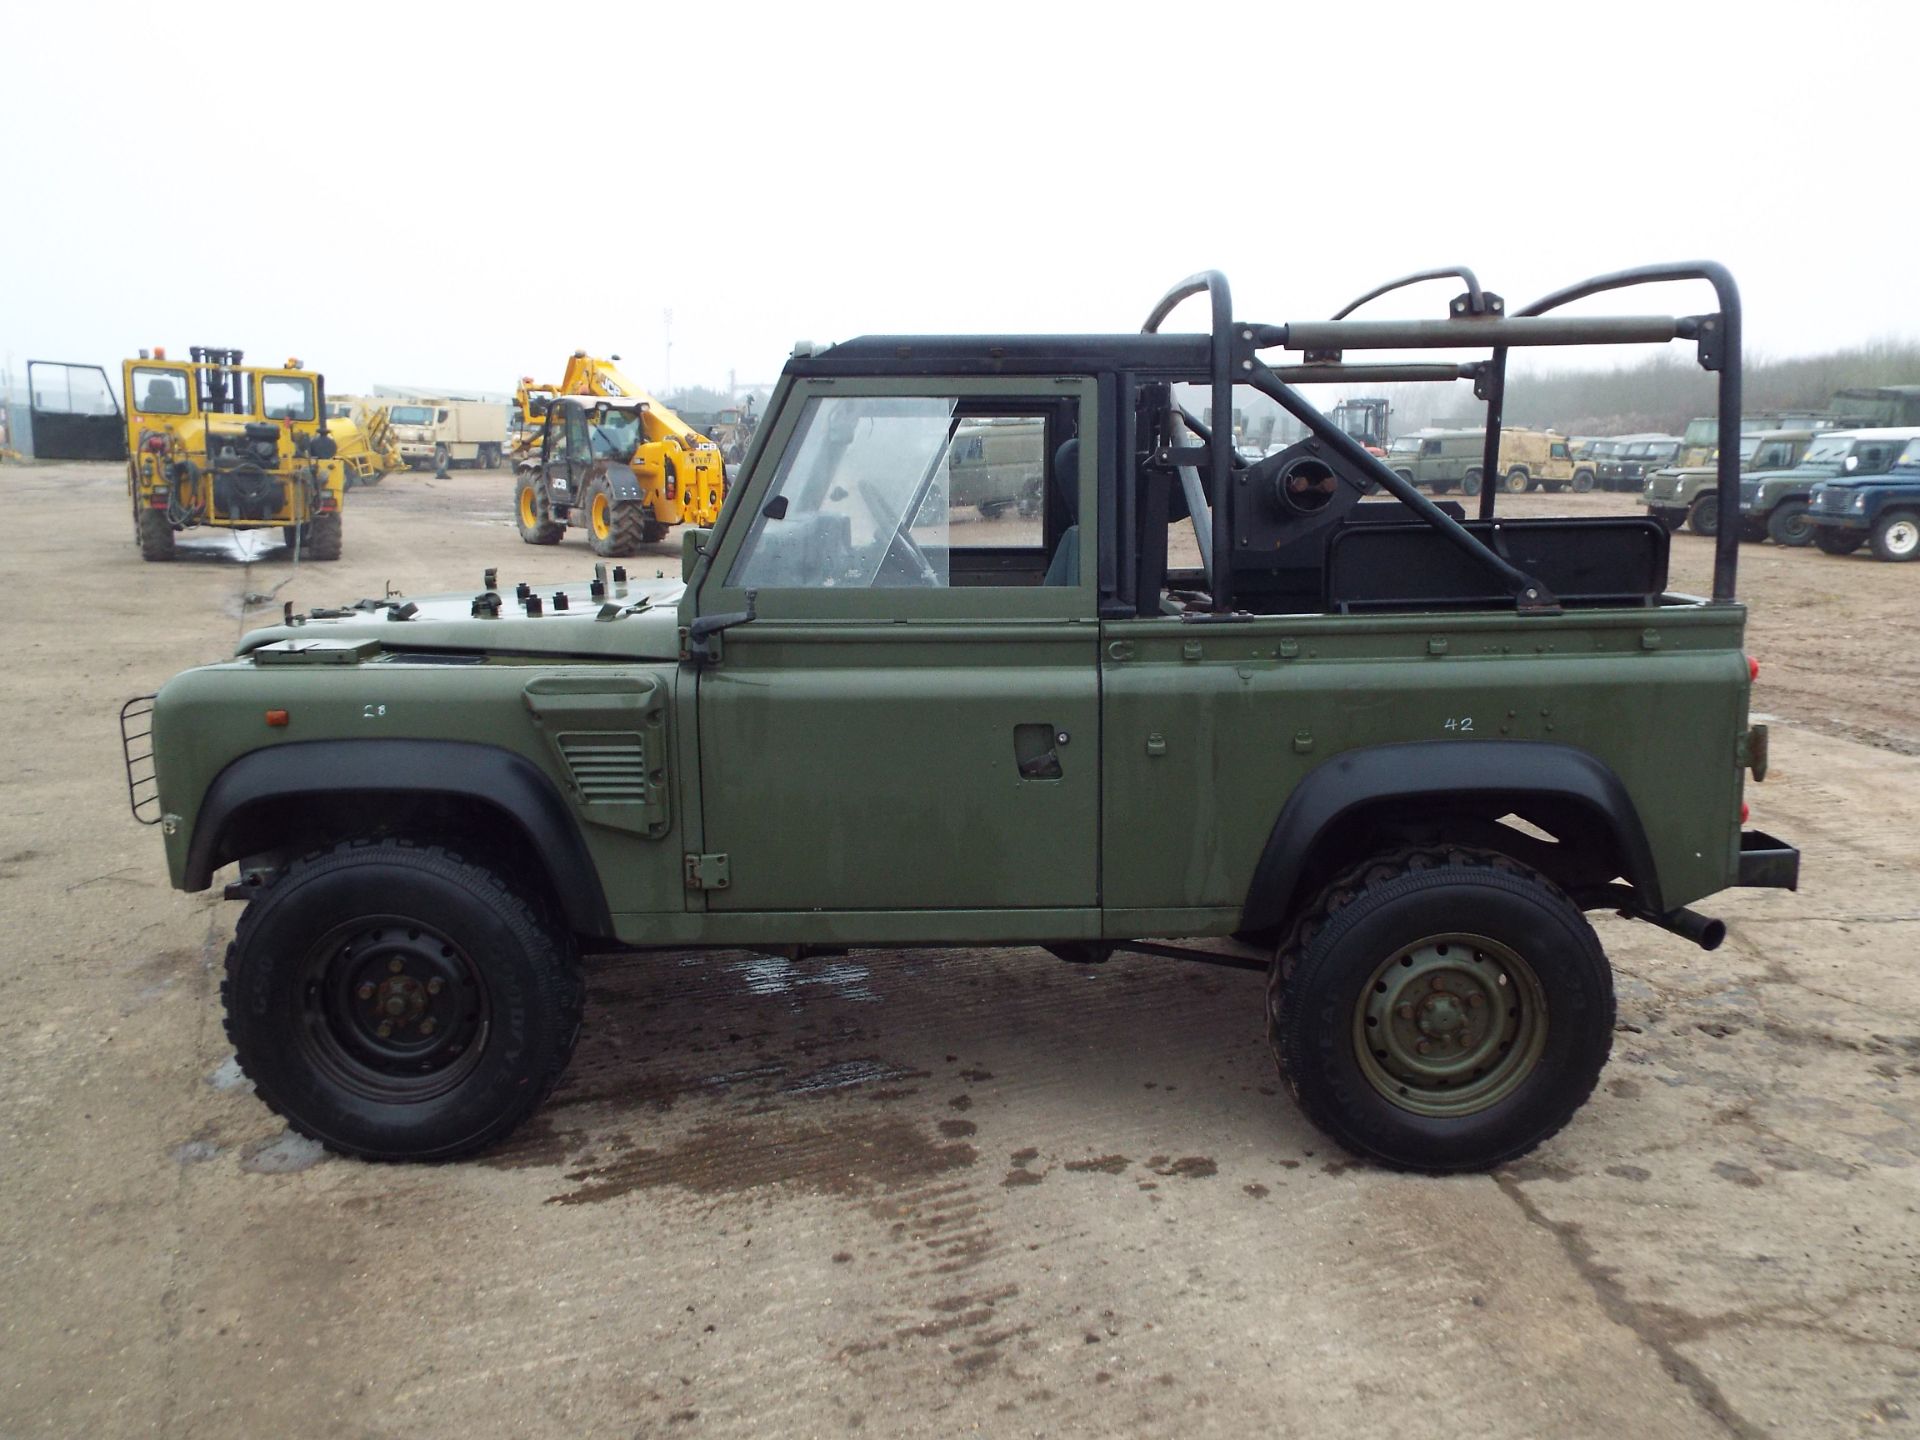 Military Specification Land Rover Wolf 90 Soft Top - Image 4 of 25